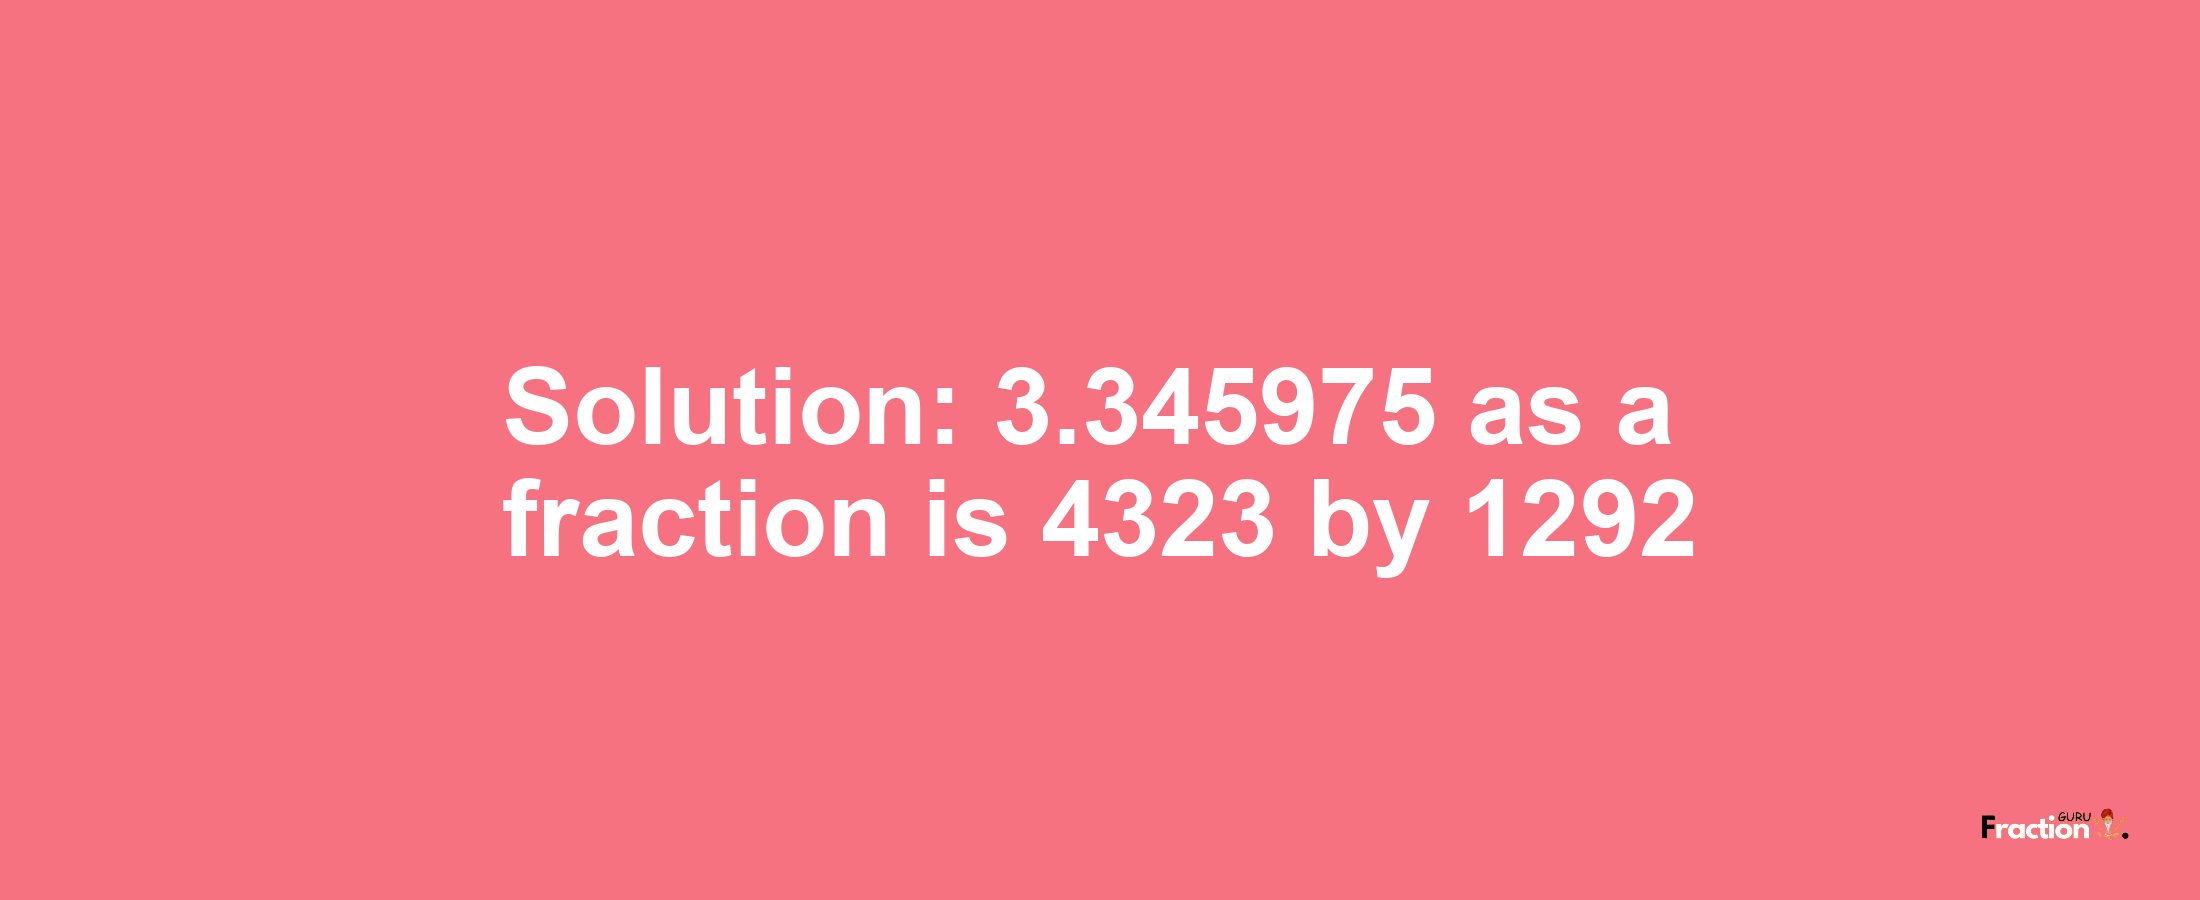 Solution:3.345975 as a fraction is 4323/1292